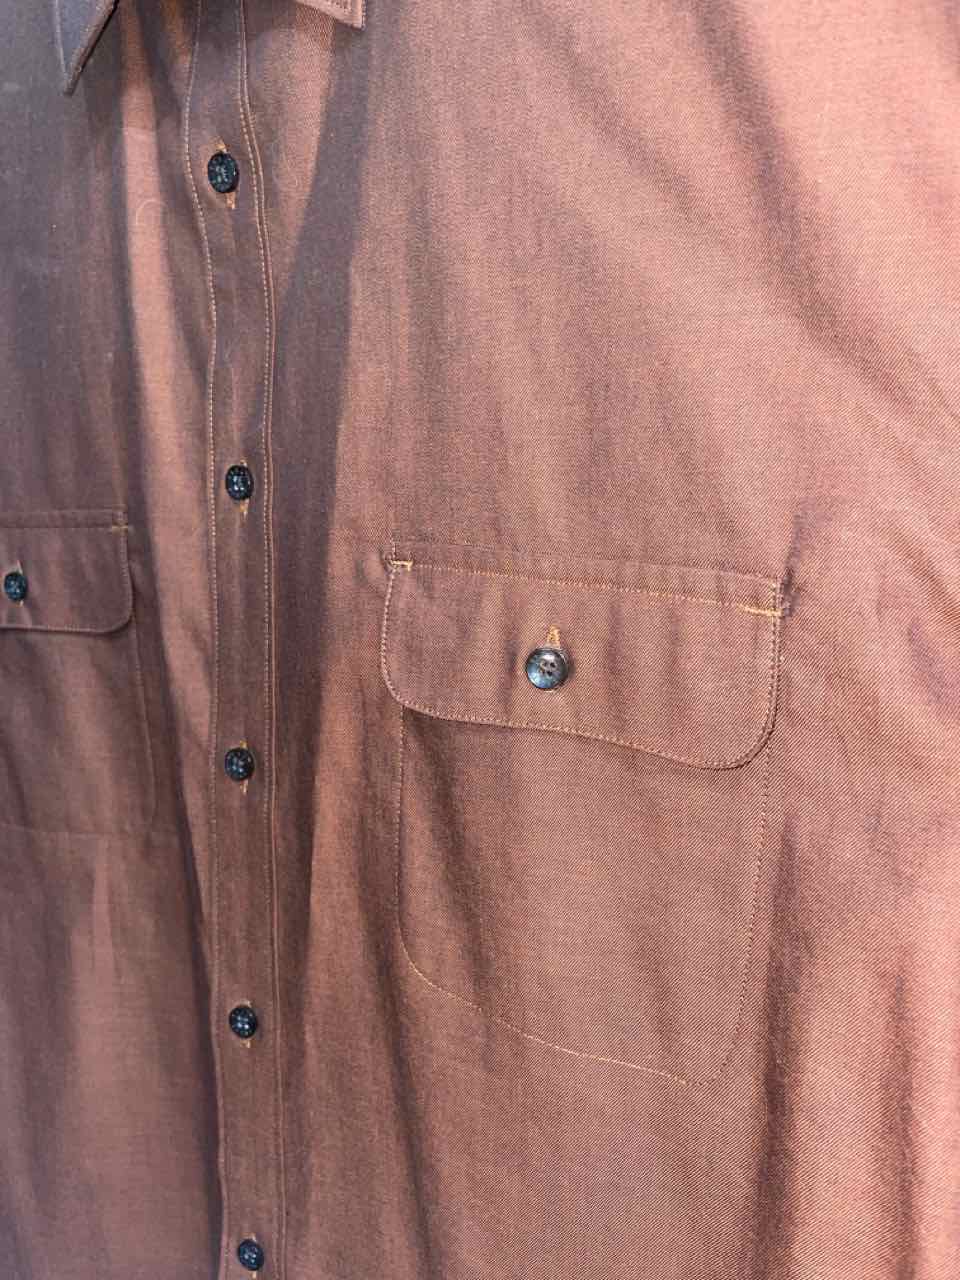 XL - Perry Ellis Long Sleeve Button Up